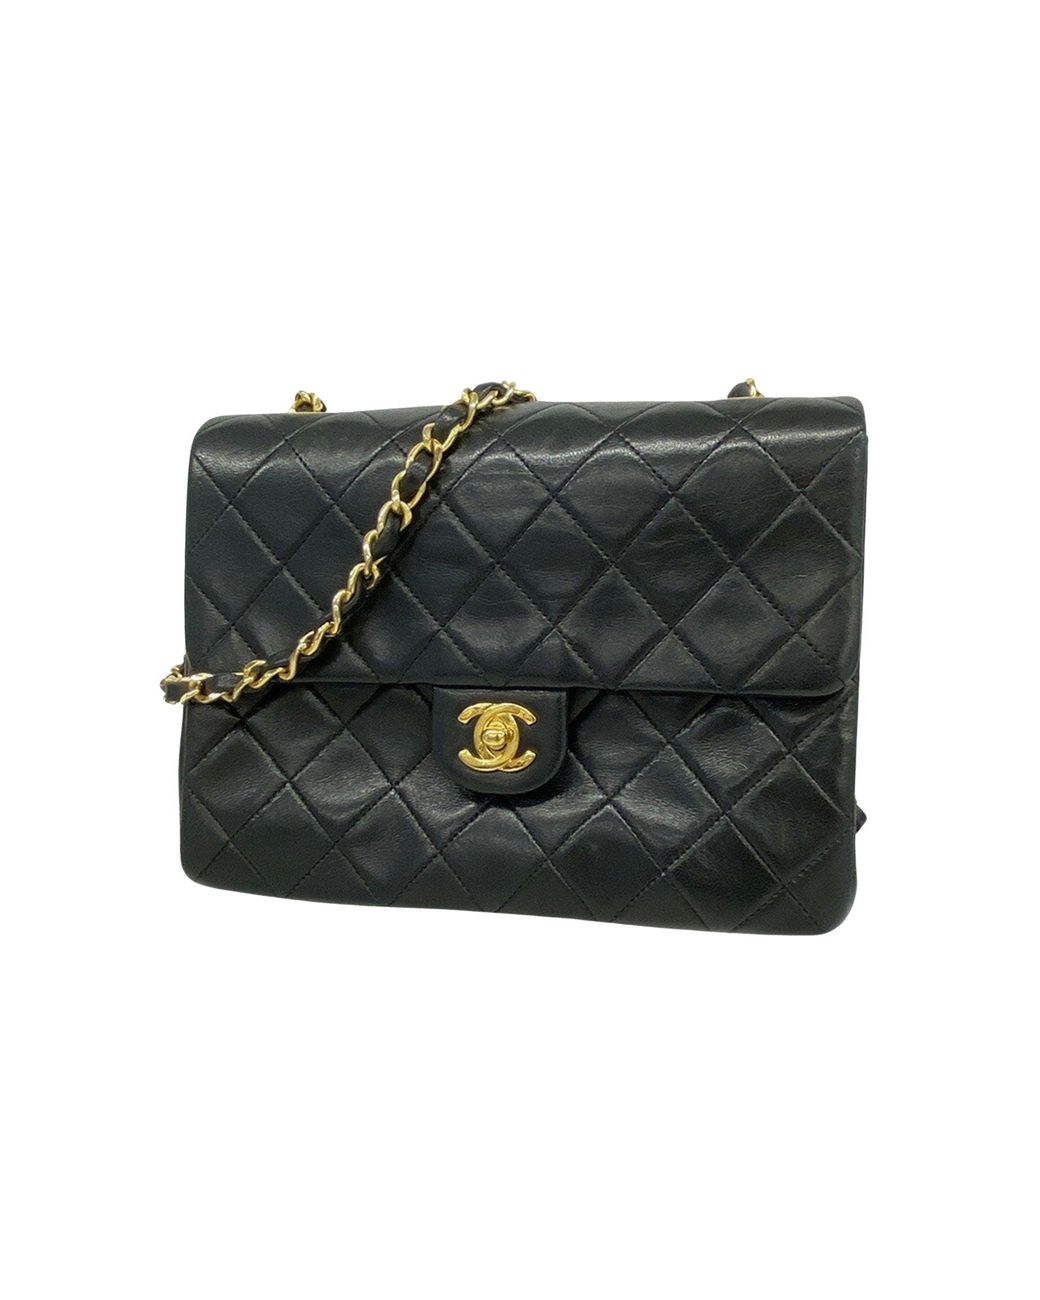 Three BEST Value Chanel Bags! - Fashion For Lunch